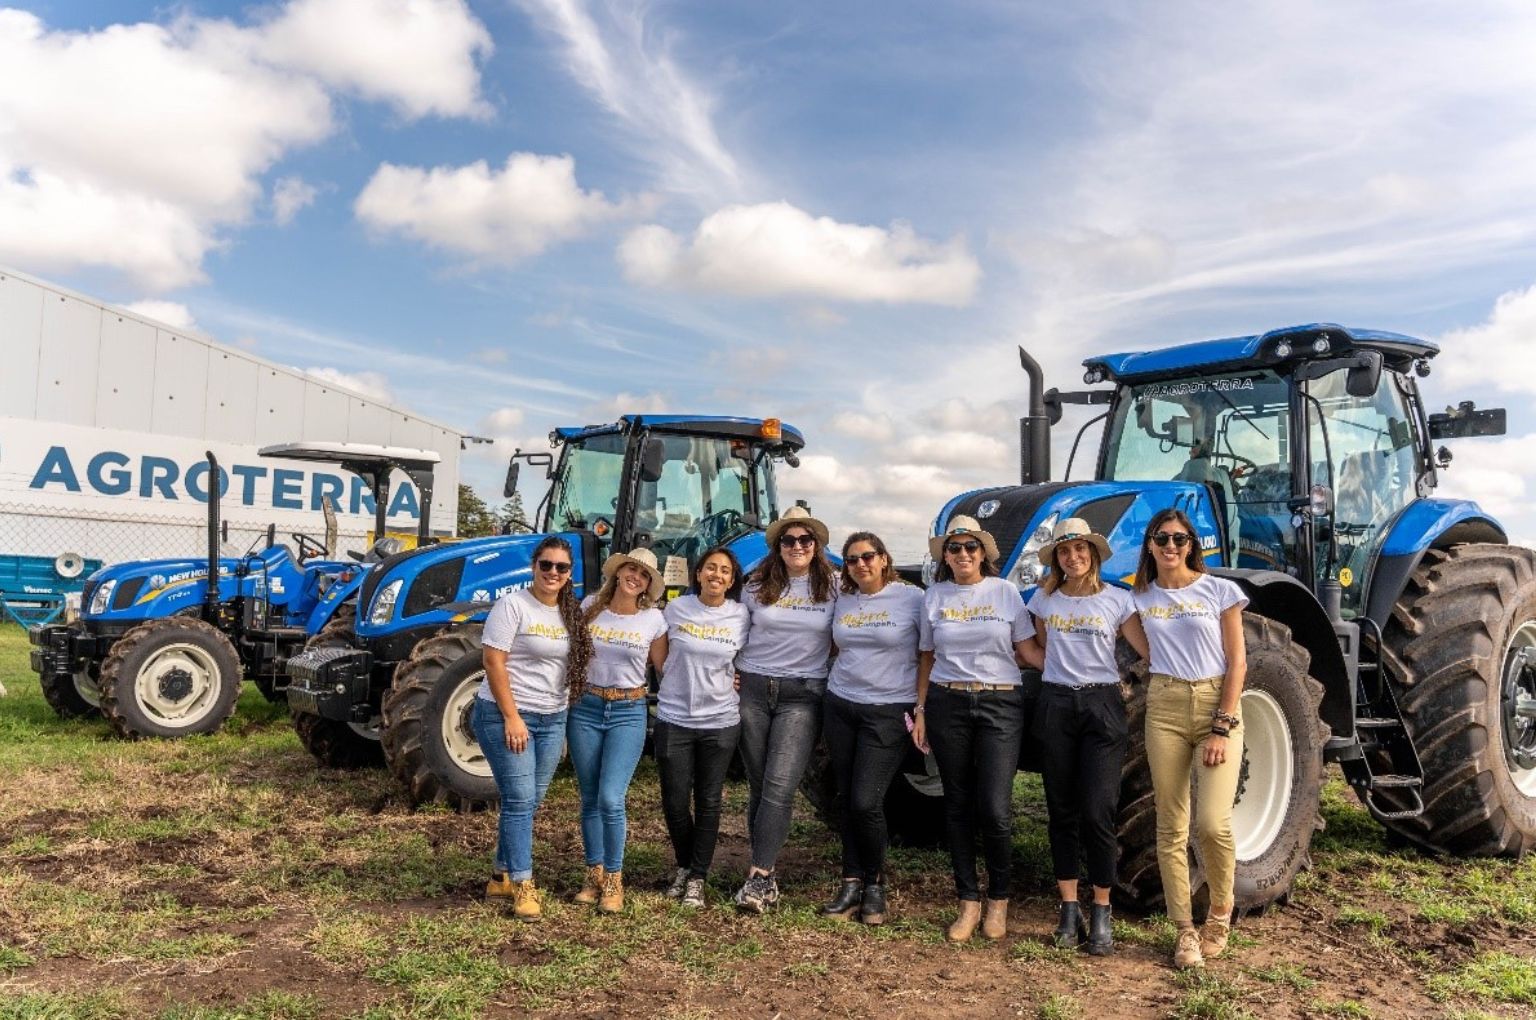 New Holland dealer Agroterra organized a networking event for women in agriculture in the city of Venado Tuerto, Santa Fé, Argentina